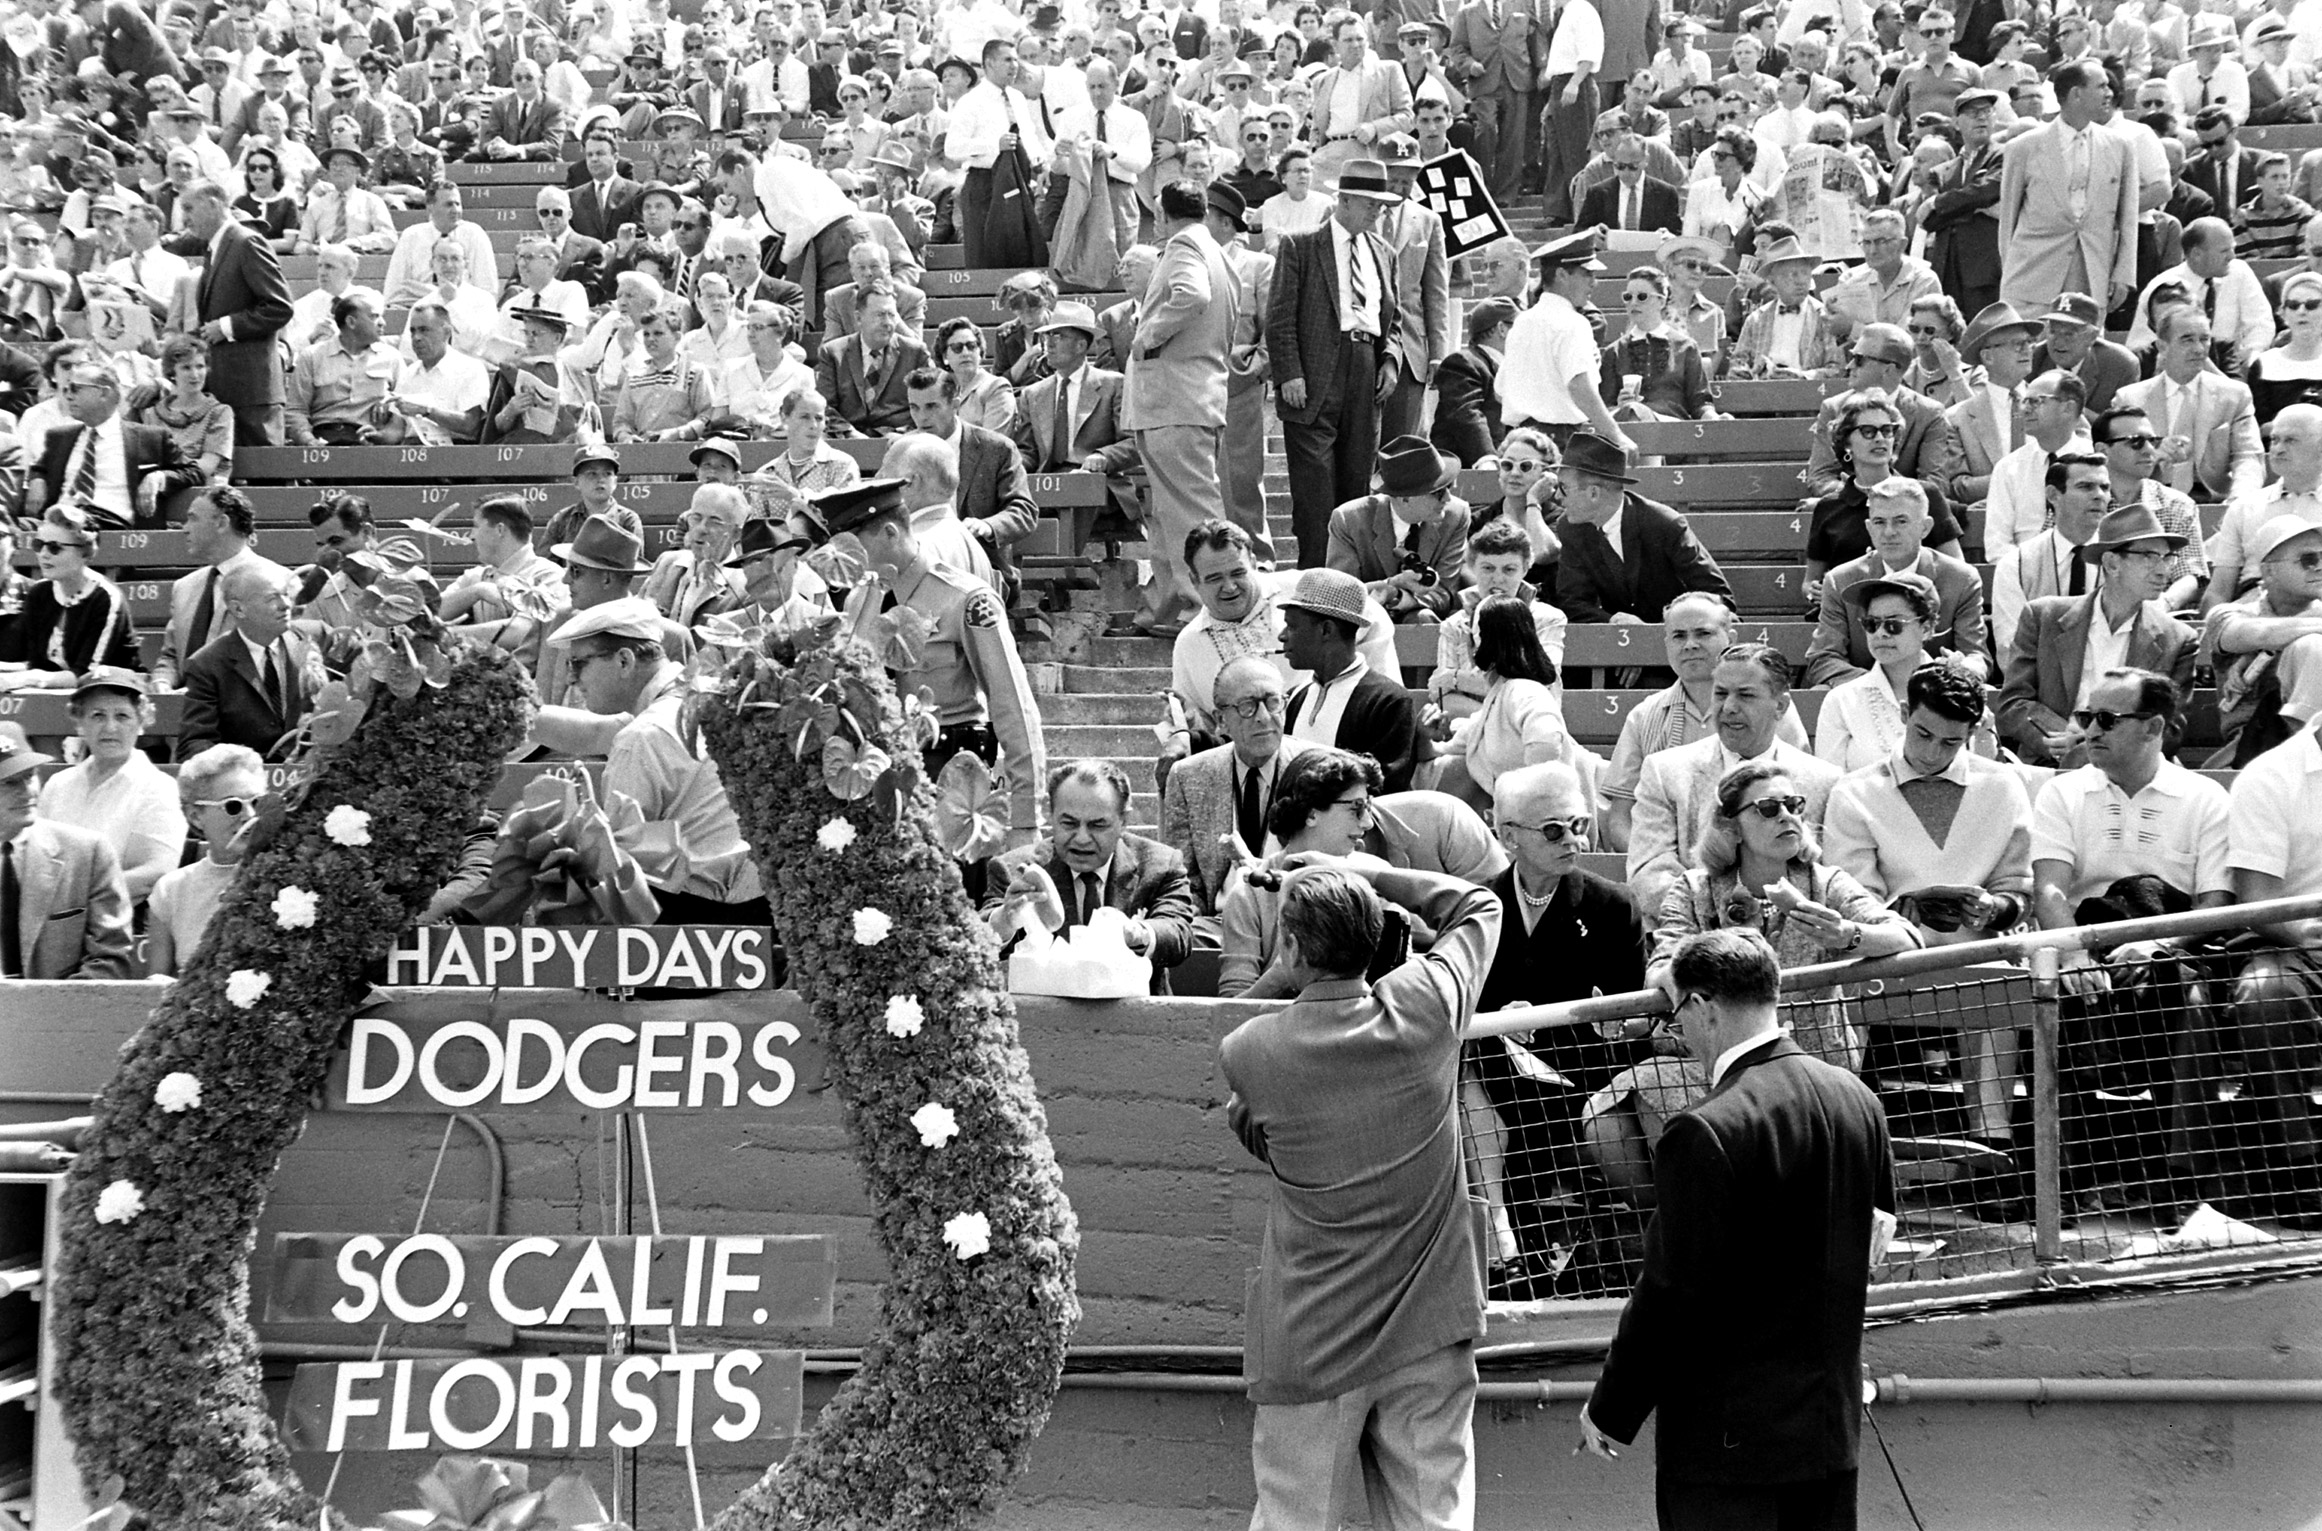 Fans at Dodgers opening day, Los Angeles, 1958.